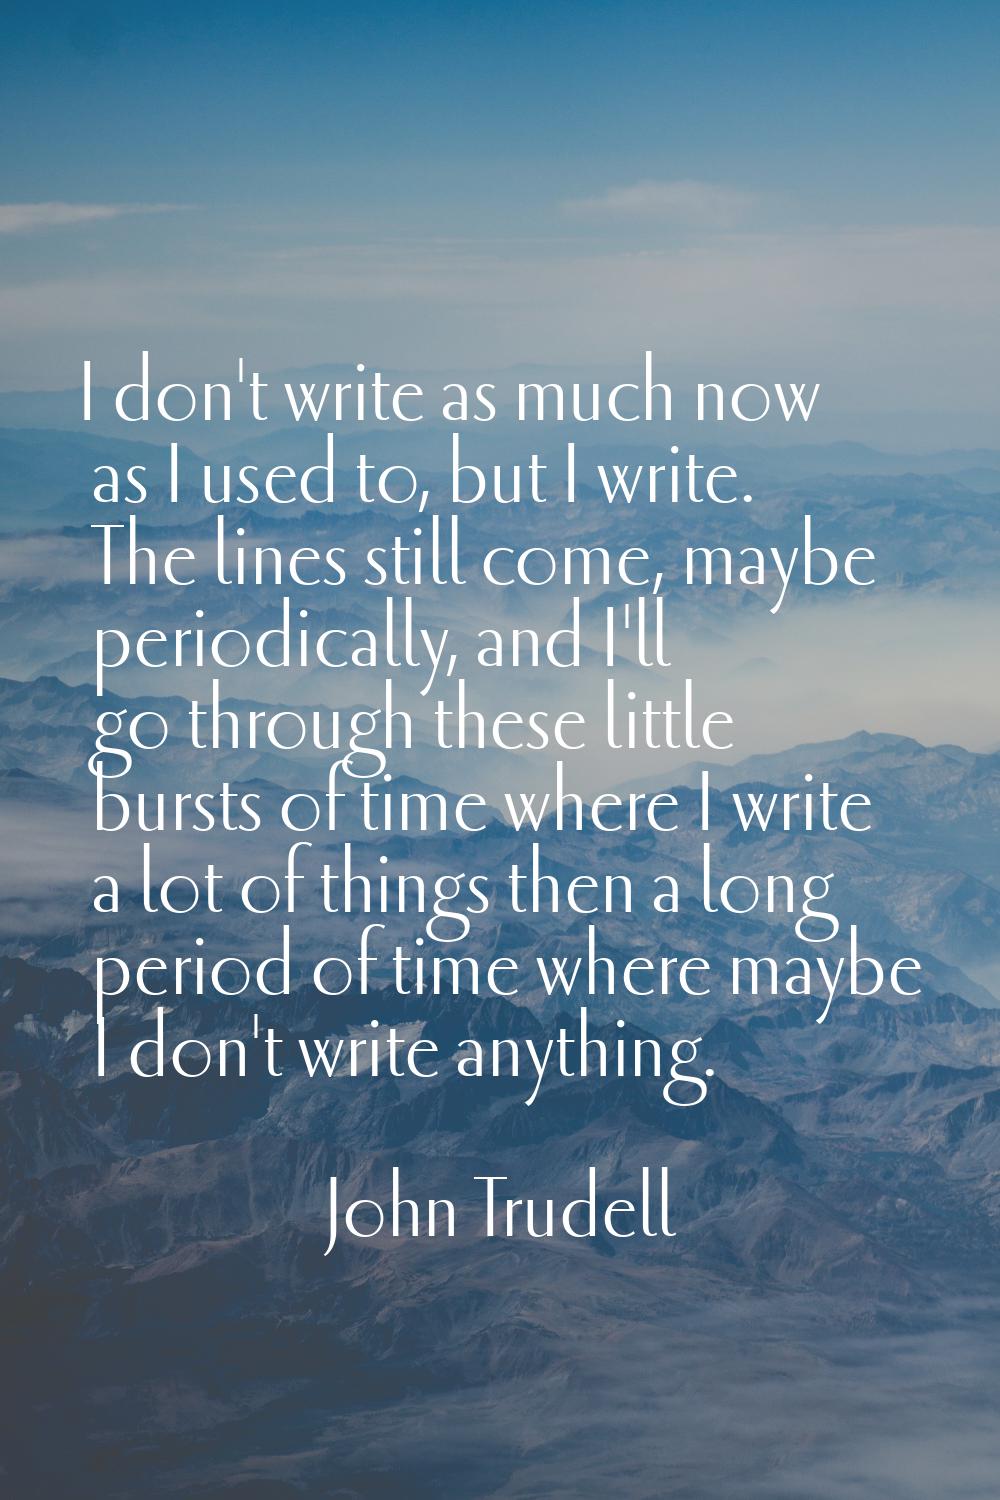 I don't write as much now as I used to, but I write. The lines still come, maybe periodically, and 